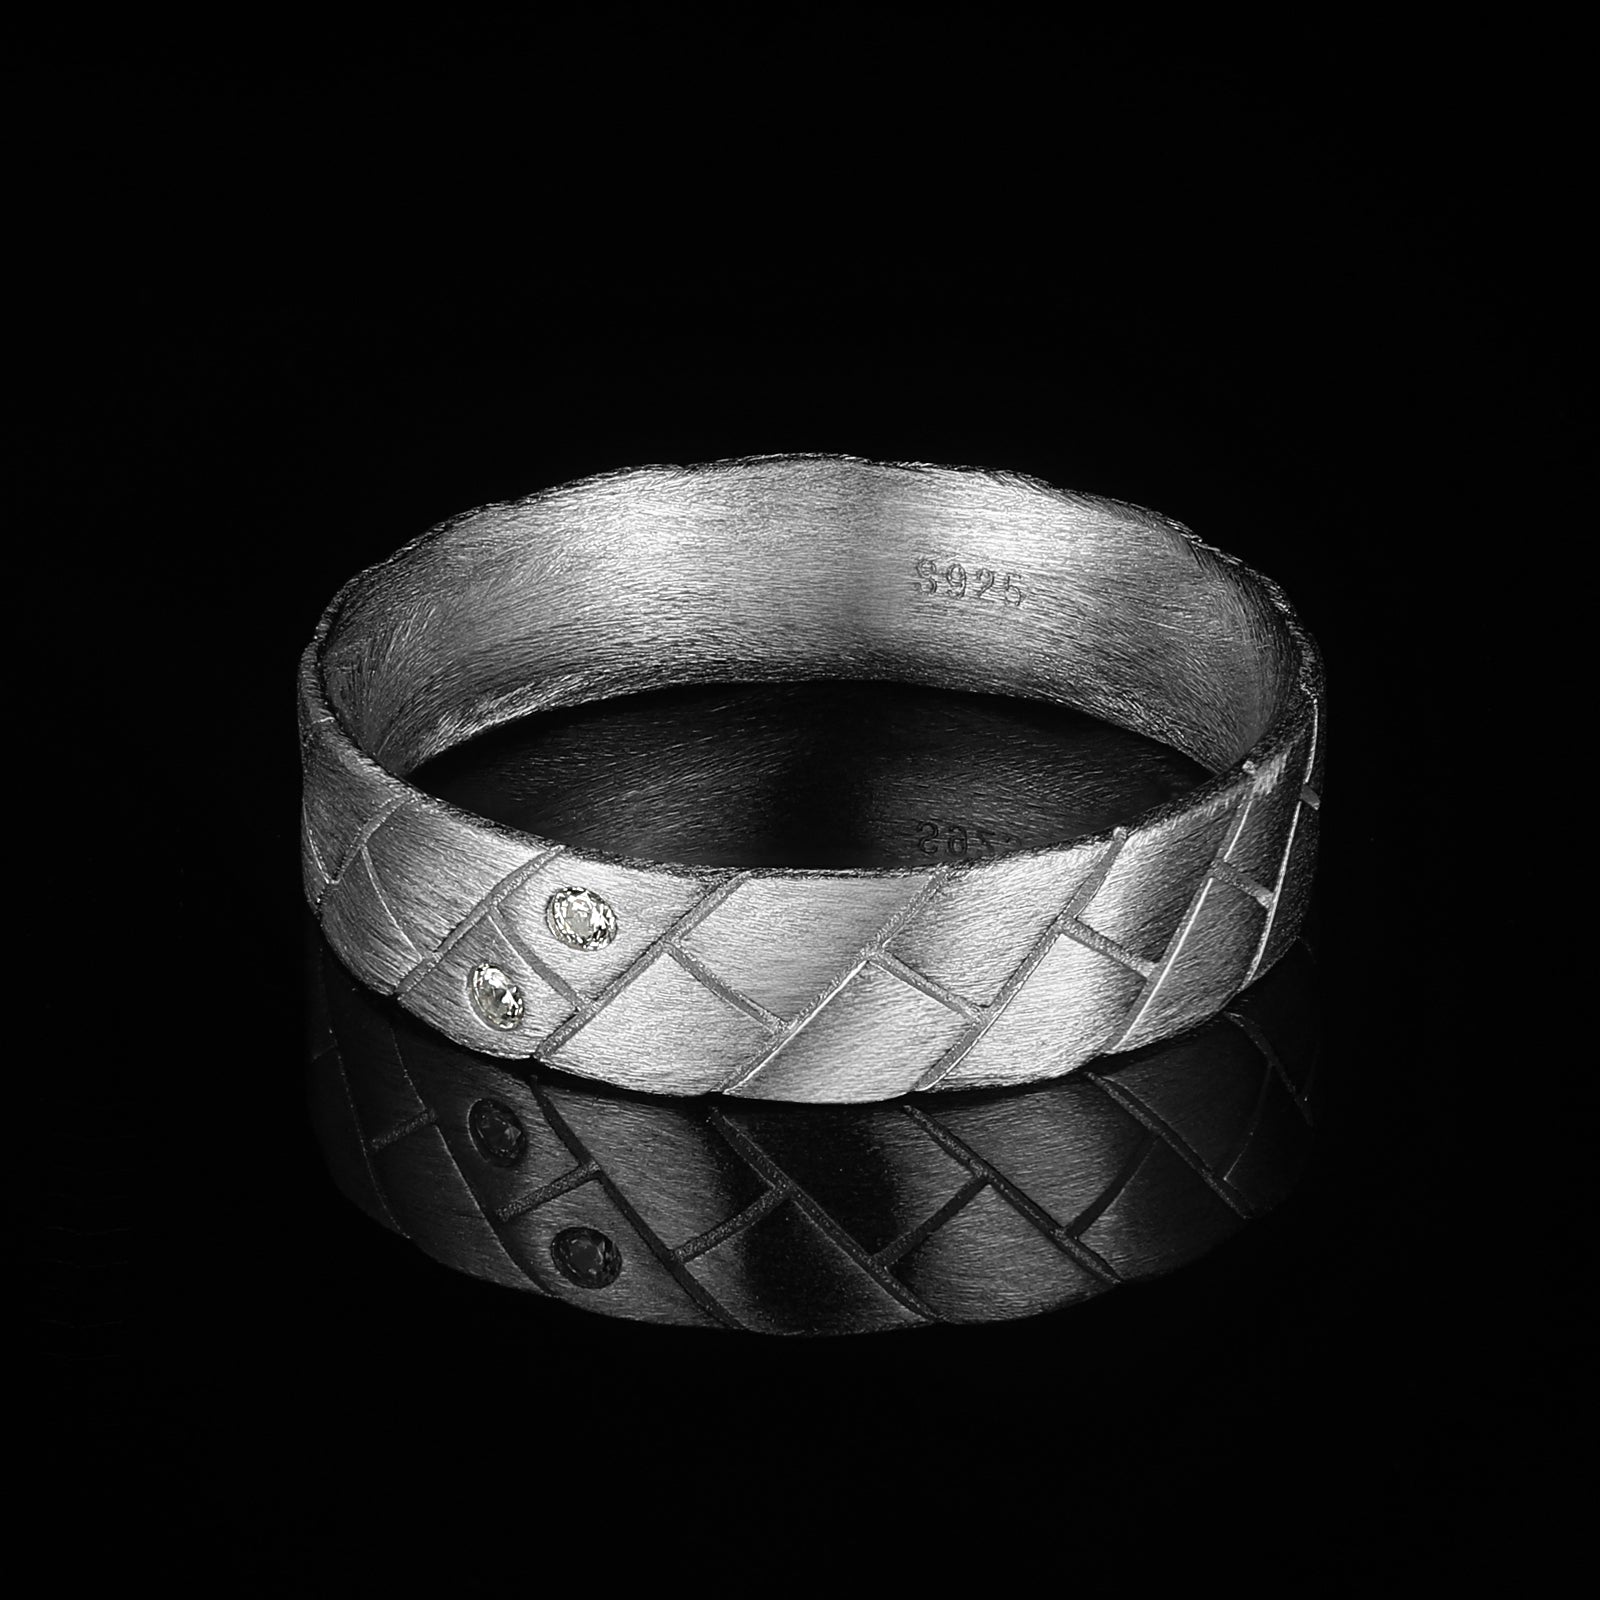 THE EXPLORER RING. - 925 STERLING SILVER